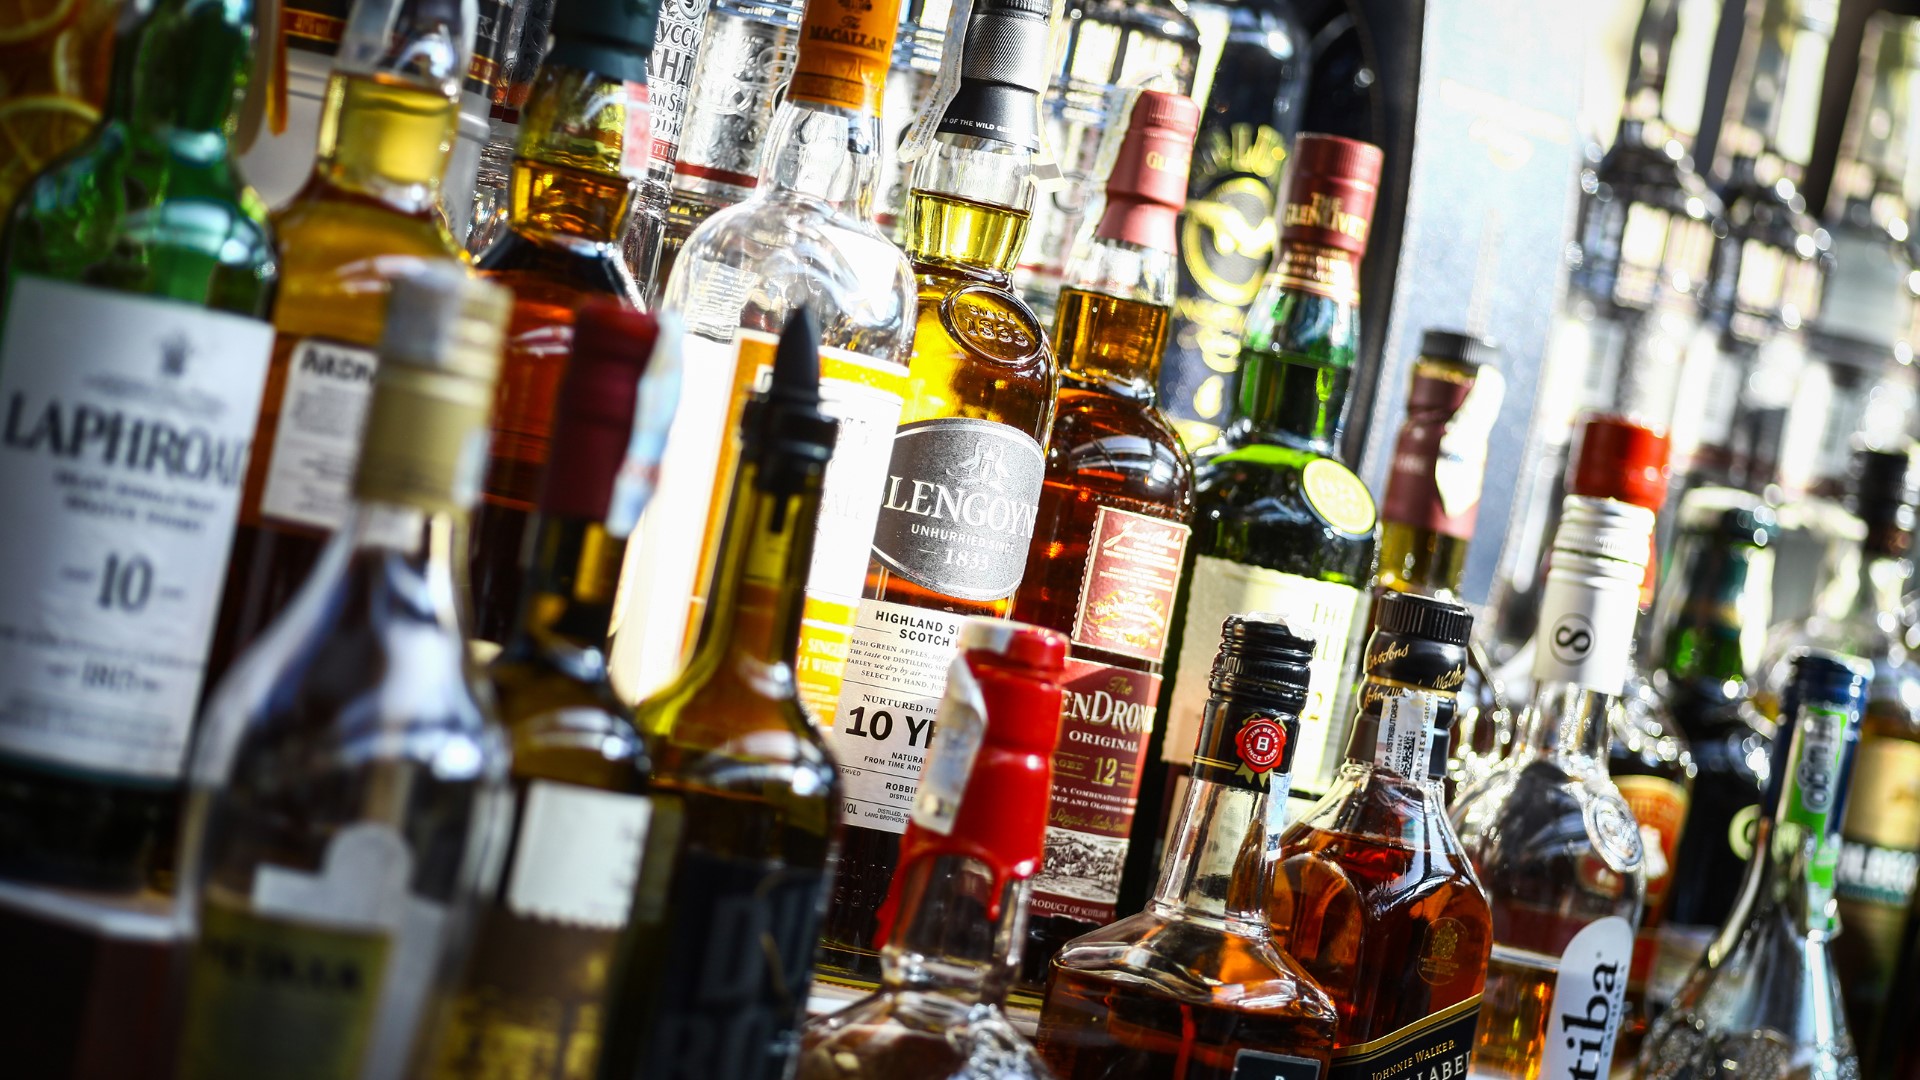 Some restaurants, bars and wholesalers are having a tough time keeping alcohol on the shelves.